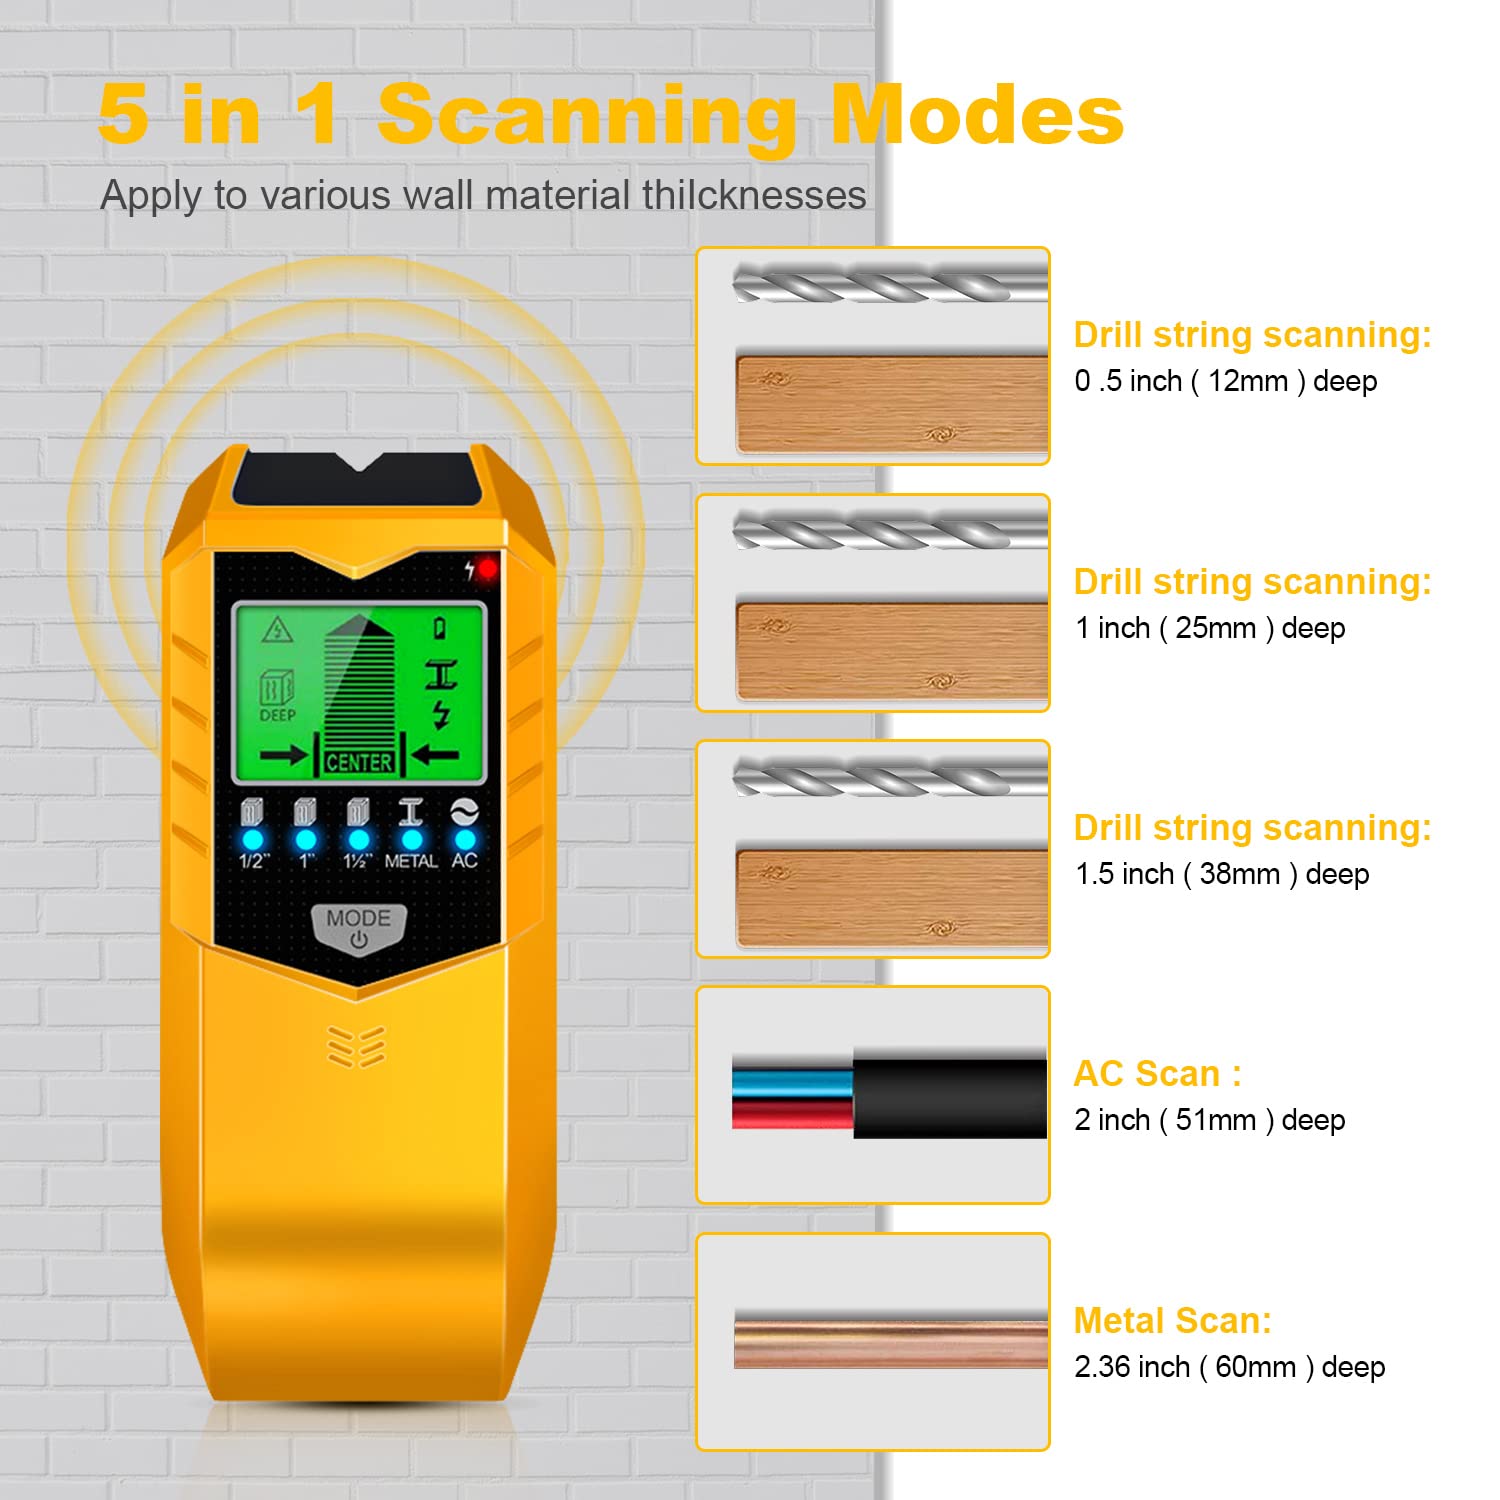 Stud Finder Wall Scanner 5 in 1 Upgraded Electronic Wall Scanner with Intelligent Microprocessor Chip,Batteries, Spirit Level Wood Metal and AC Wire Detection, HD LCD Display and Audio Alarm (Yellow)